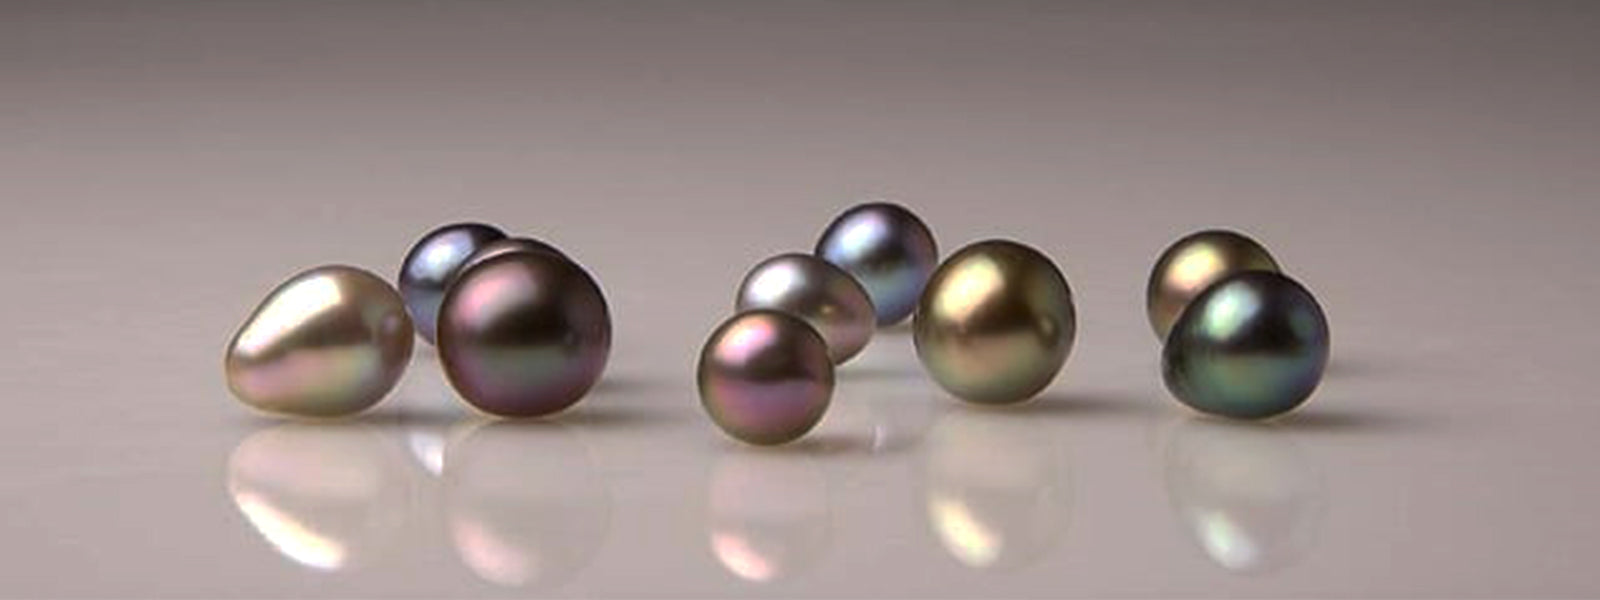 rainbow lipped pearl oyster jewellery